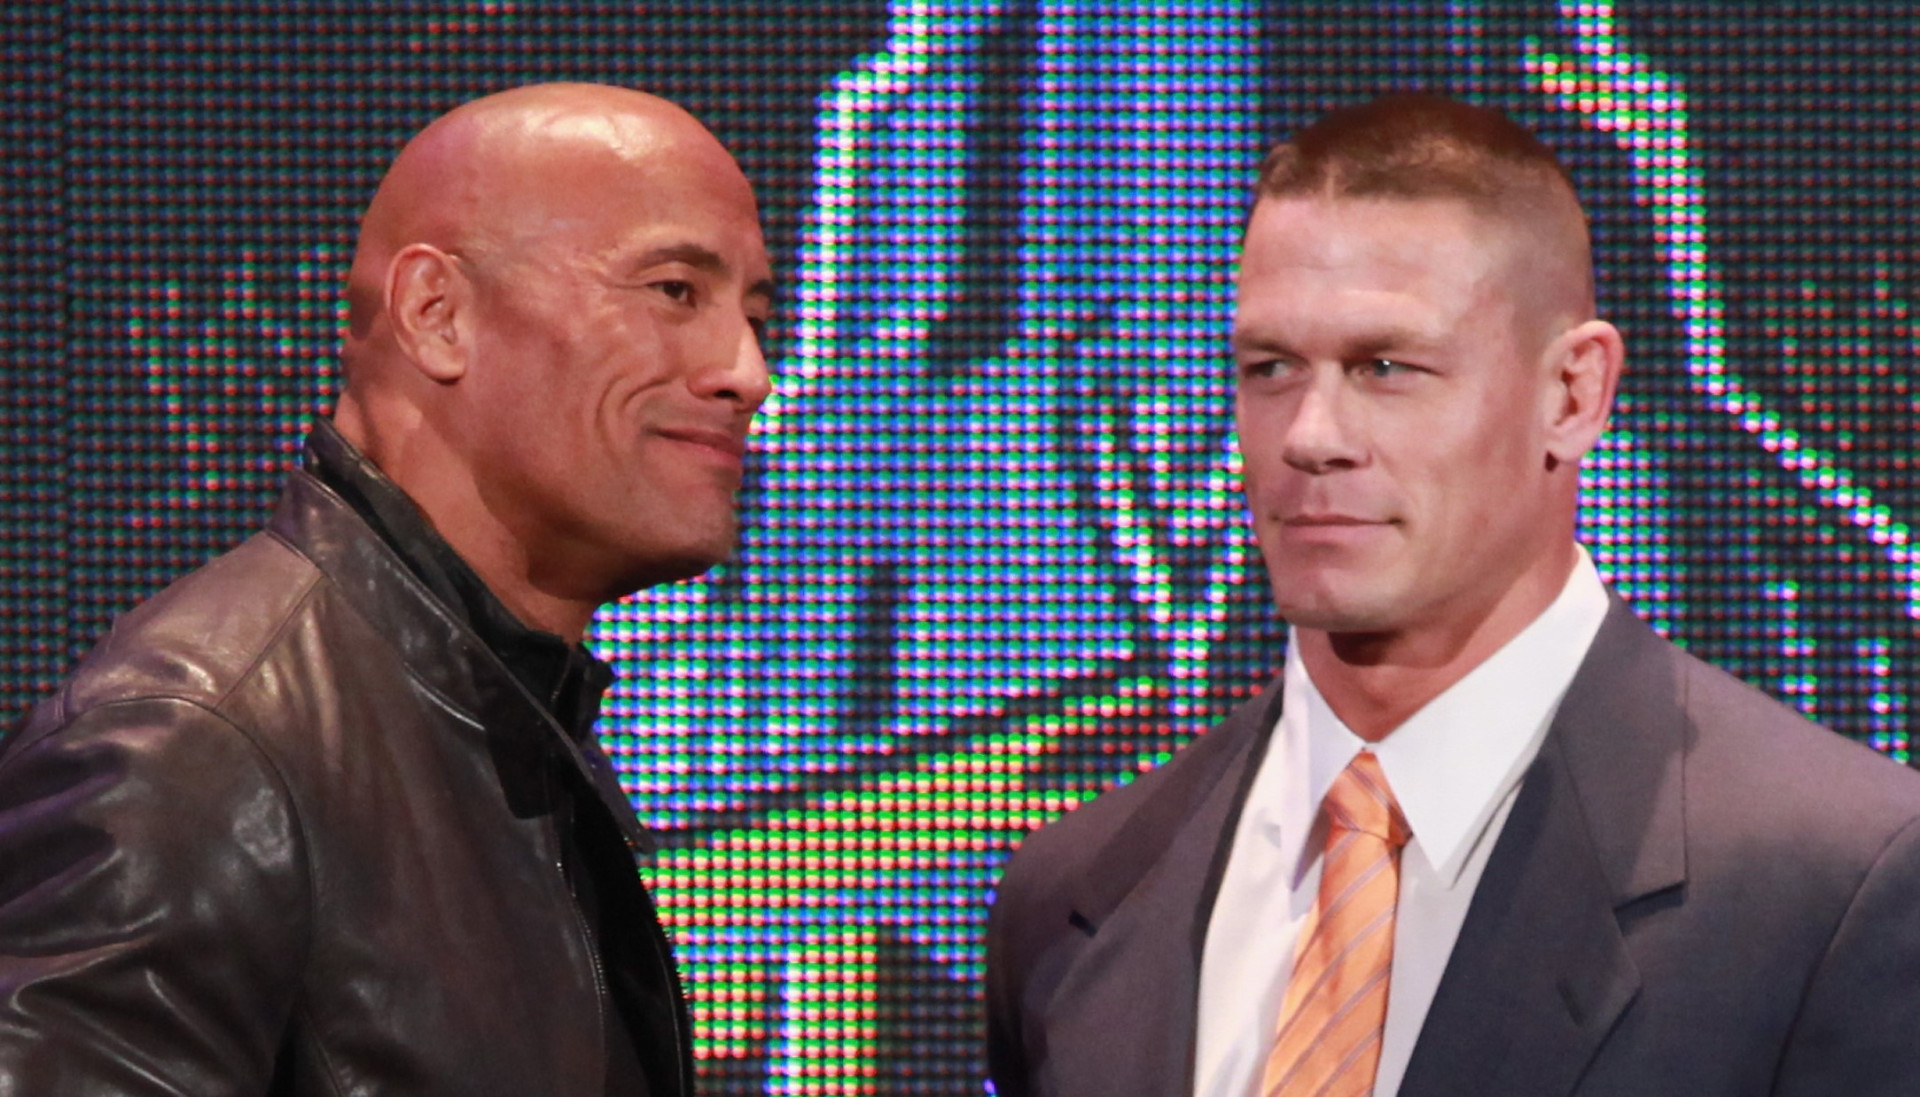 <p>Wrestling icons turned Hollywood actors John Cena and Dwayne Johnson found themselves in a heated rivalry ten years ago. Speaking on the 'Happy Sad Confused' podcast, Cena acknowledged his mistake in 2011 when Johnson, already a successful movie star, returned to the WWE after a decade-long absence. Cena said it was his lack of "any concept of growth or someone else’s perspective” that led him to call Johnson out for leaving wrestling. Luckily, their feud didn't totally ruin their relationship, as Cena added, "it was almost at the cost of our friendship, which I would like to say now is in a really good place.”</p><p>You may also like:<a href="https://www.starsinsider.com/n/185213?utm_source=msn.com&utm_medium=display&utm_campaign=referral_description&utm_content=570915en-en"> The coldest places in America</a></p>